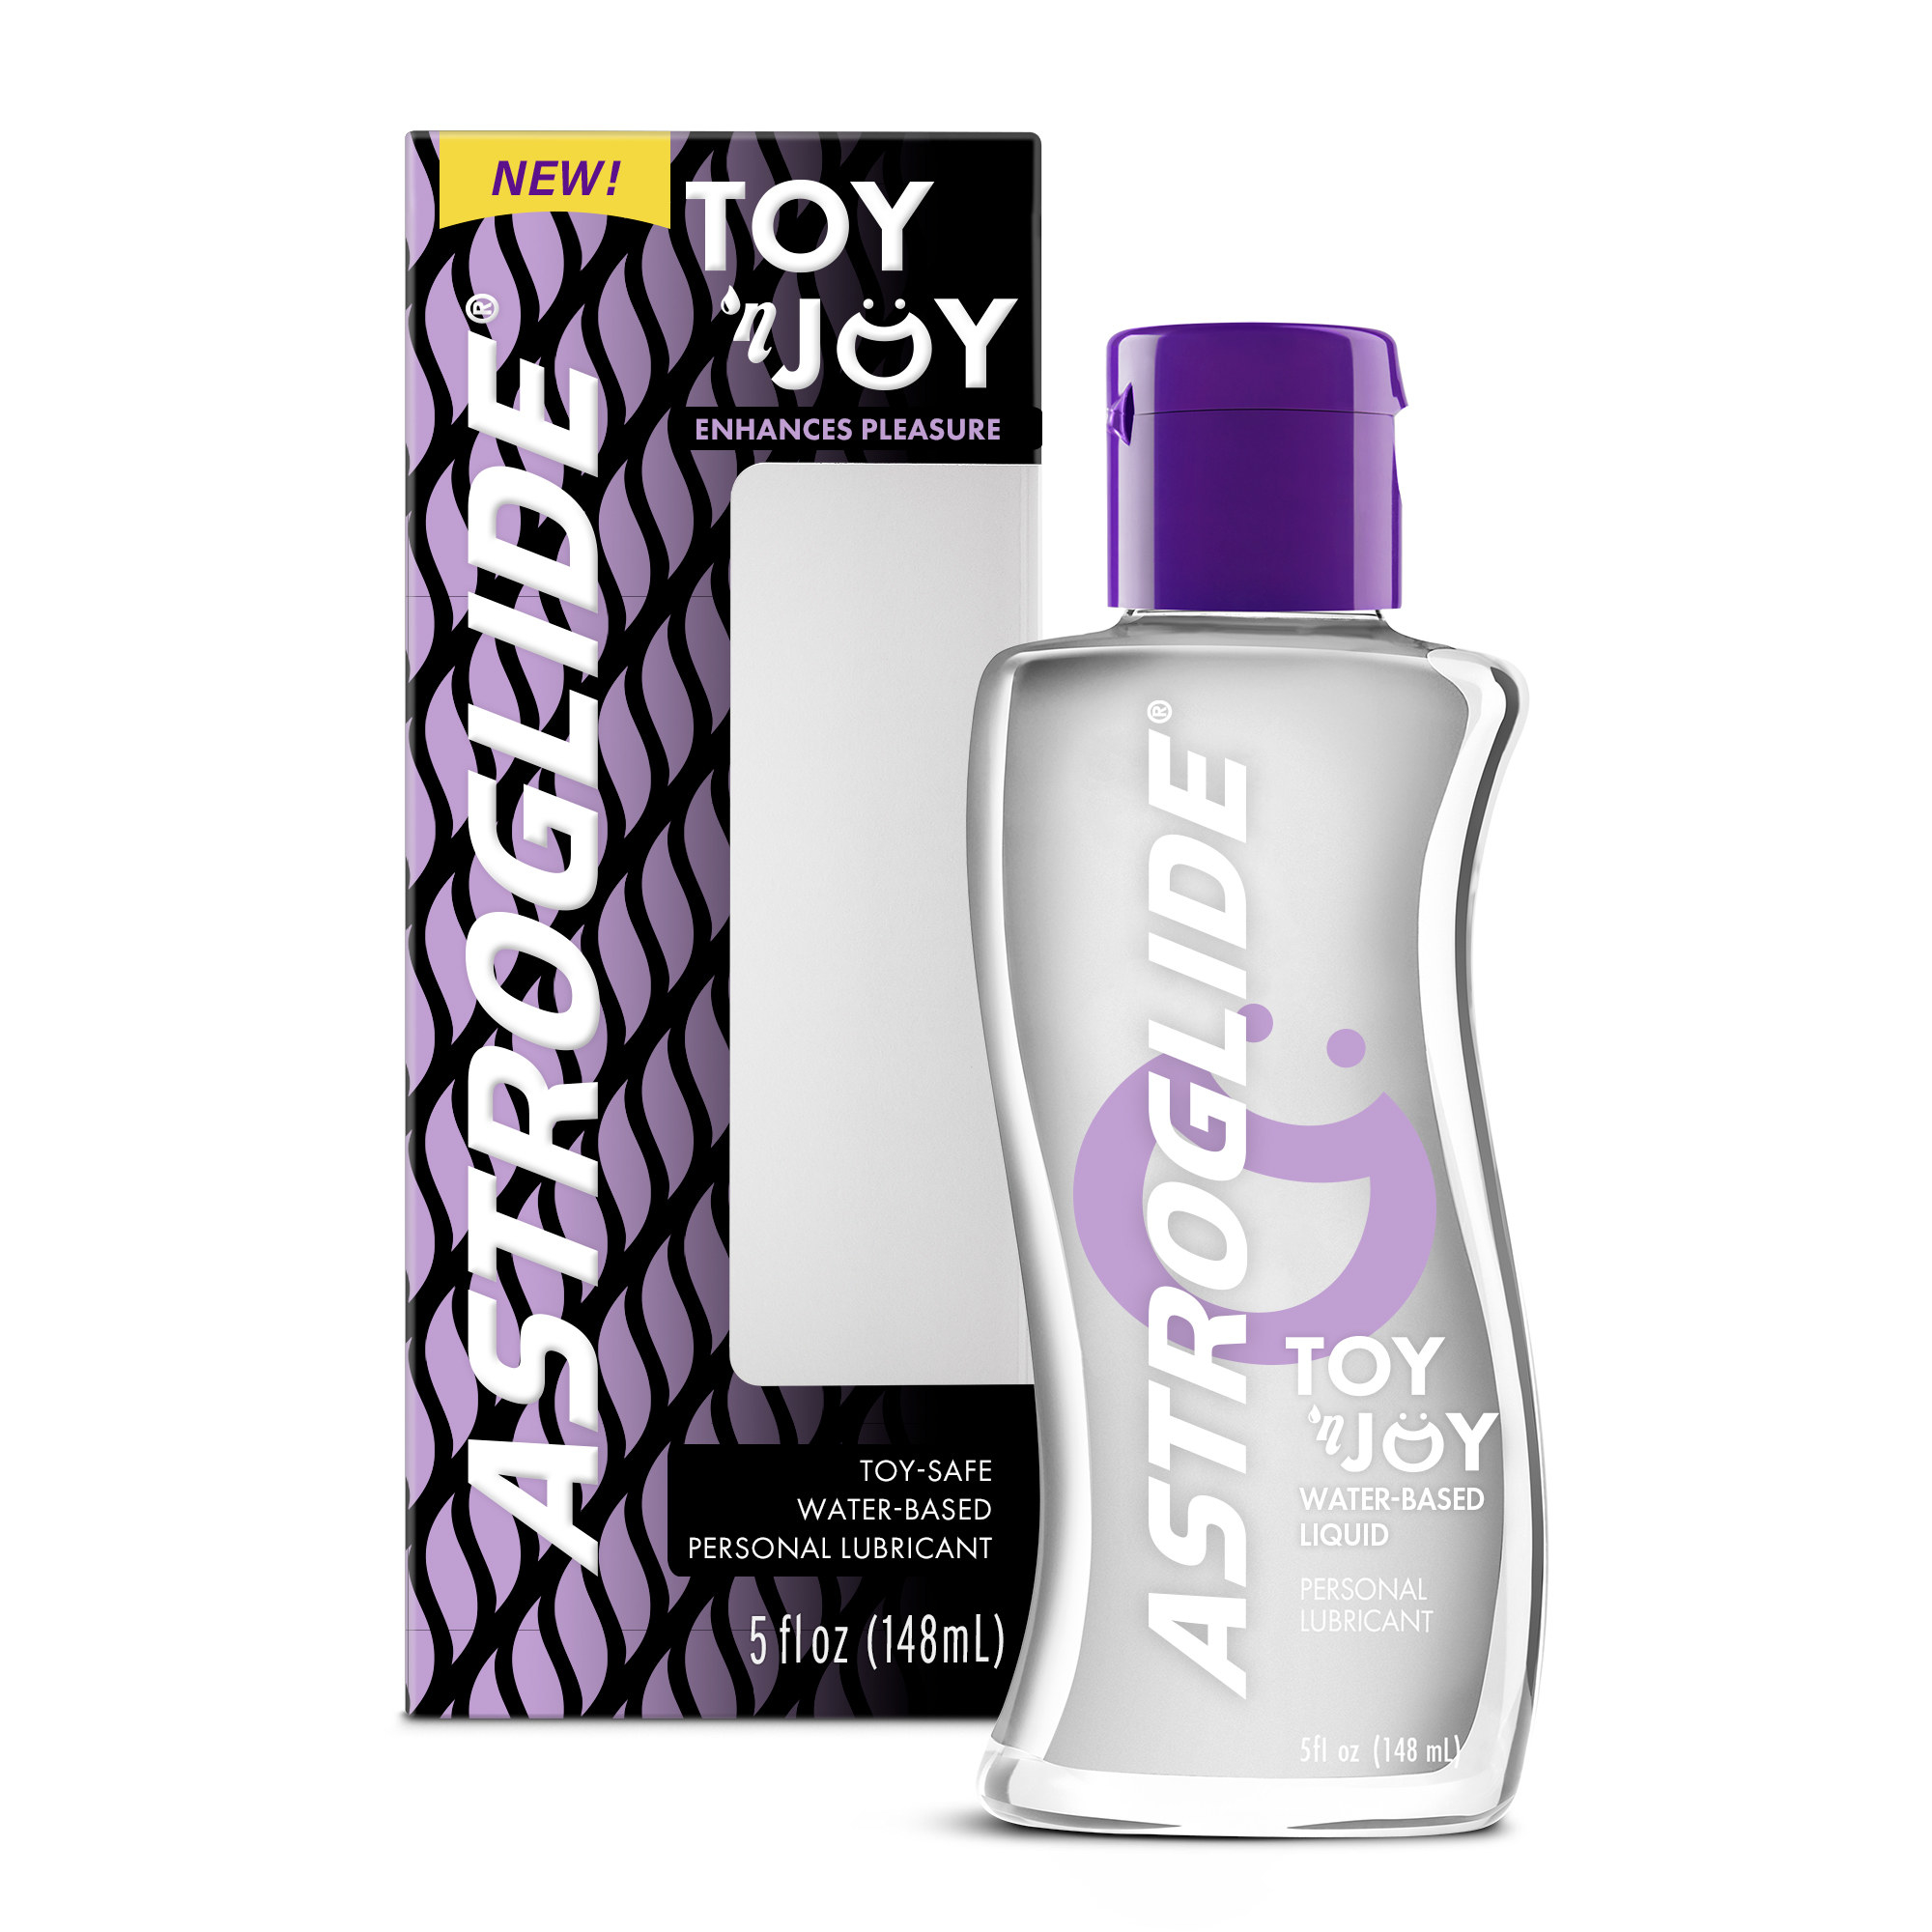 the astroglide toy &#x27;n joy lube and its boxed packaging